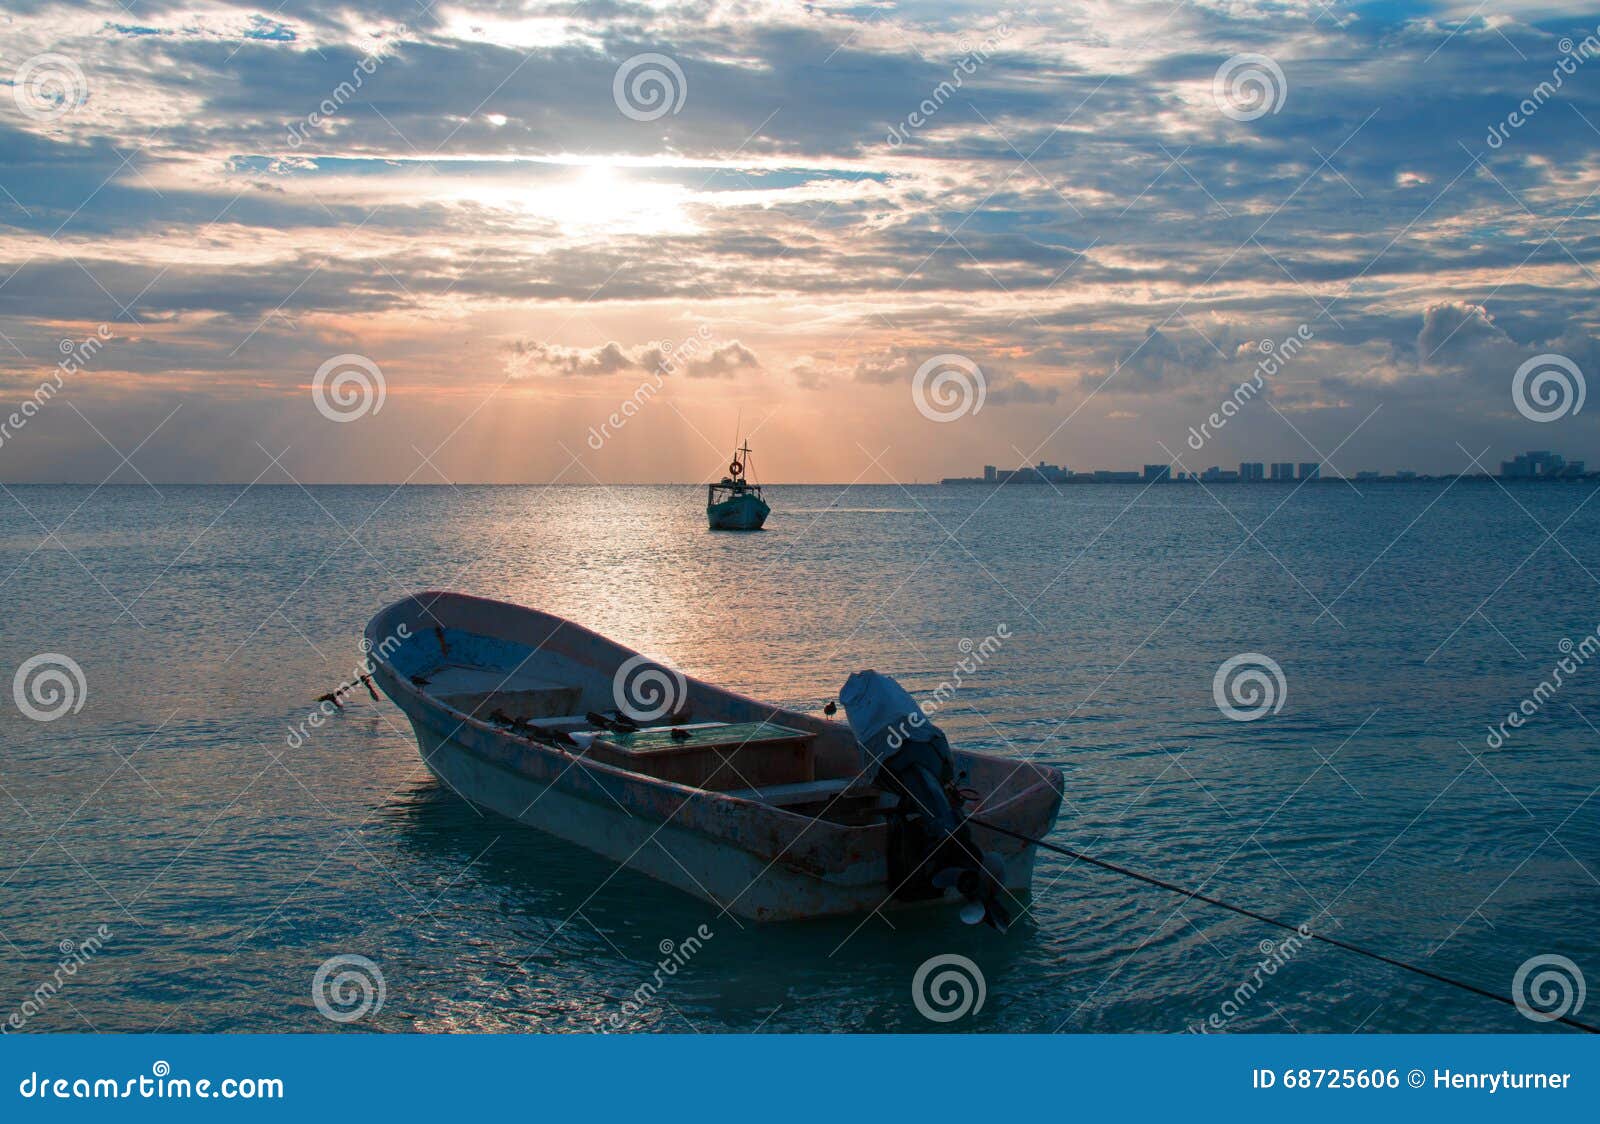 sunrise view of mexican fishing boat and ponga / skiff in puerto juarez harbor of cancun bay